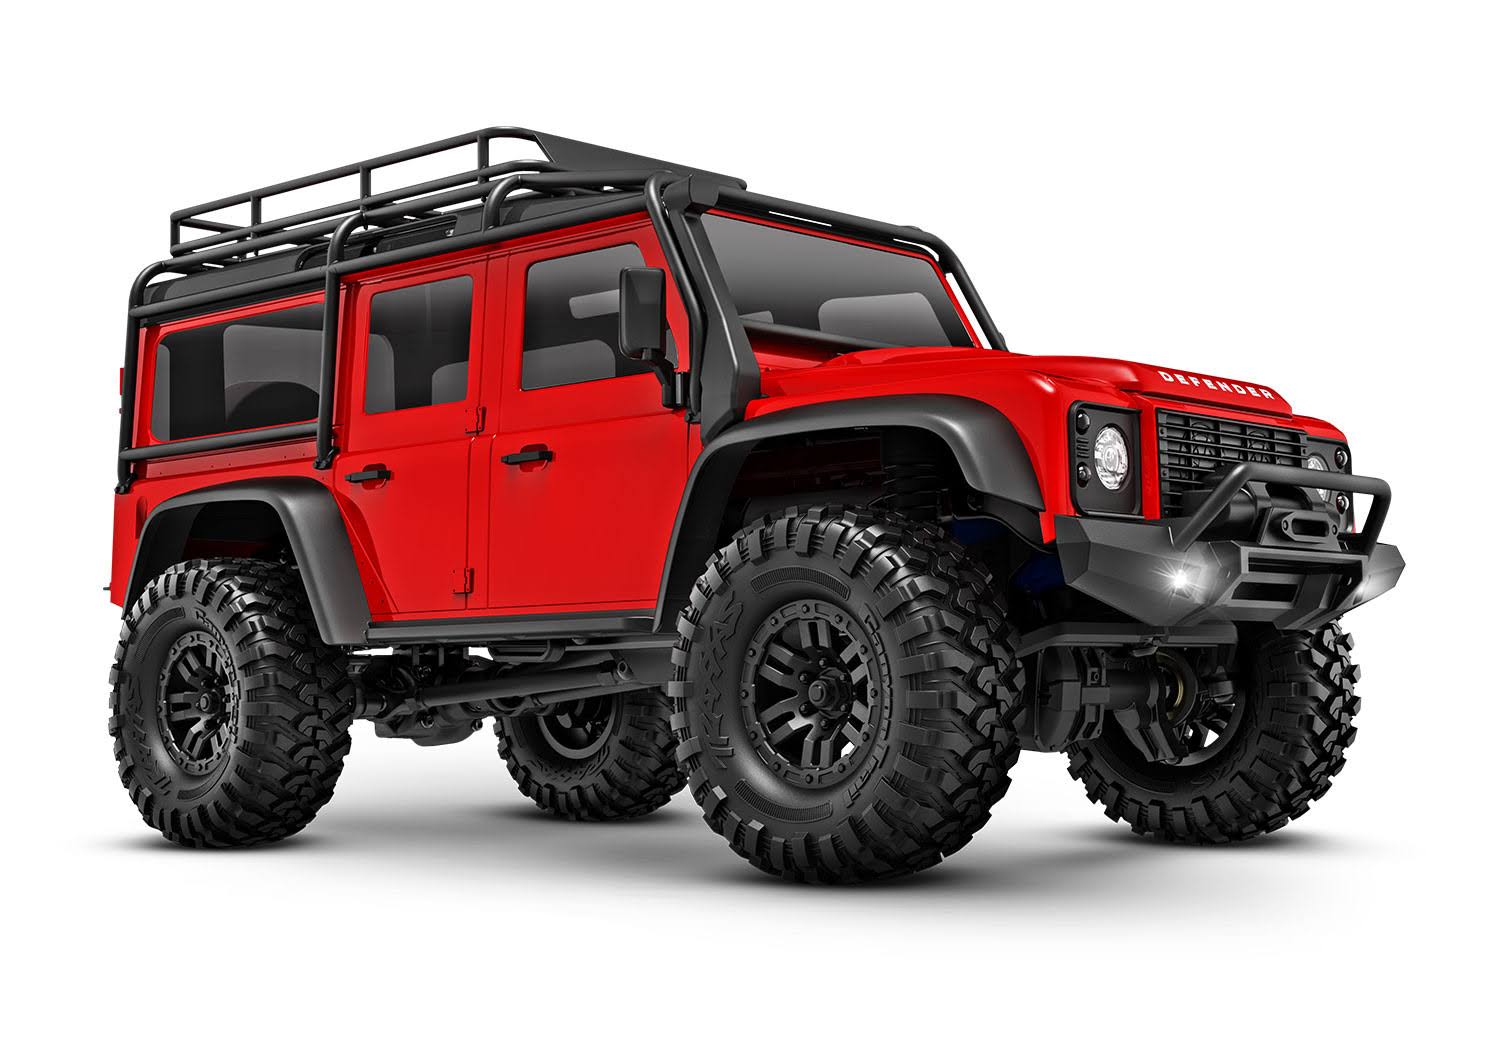 Traxxas 1/18 TRX-4M Land Rover Defender (Red)